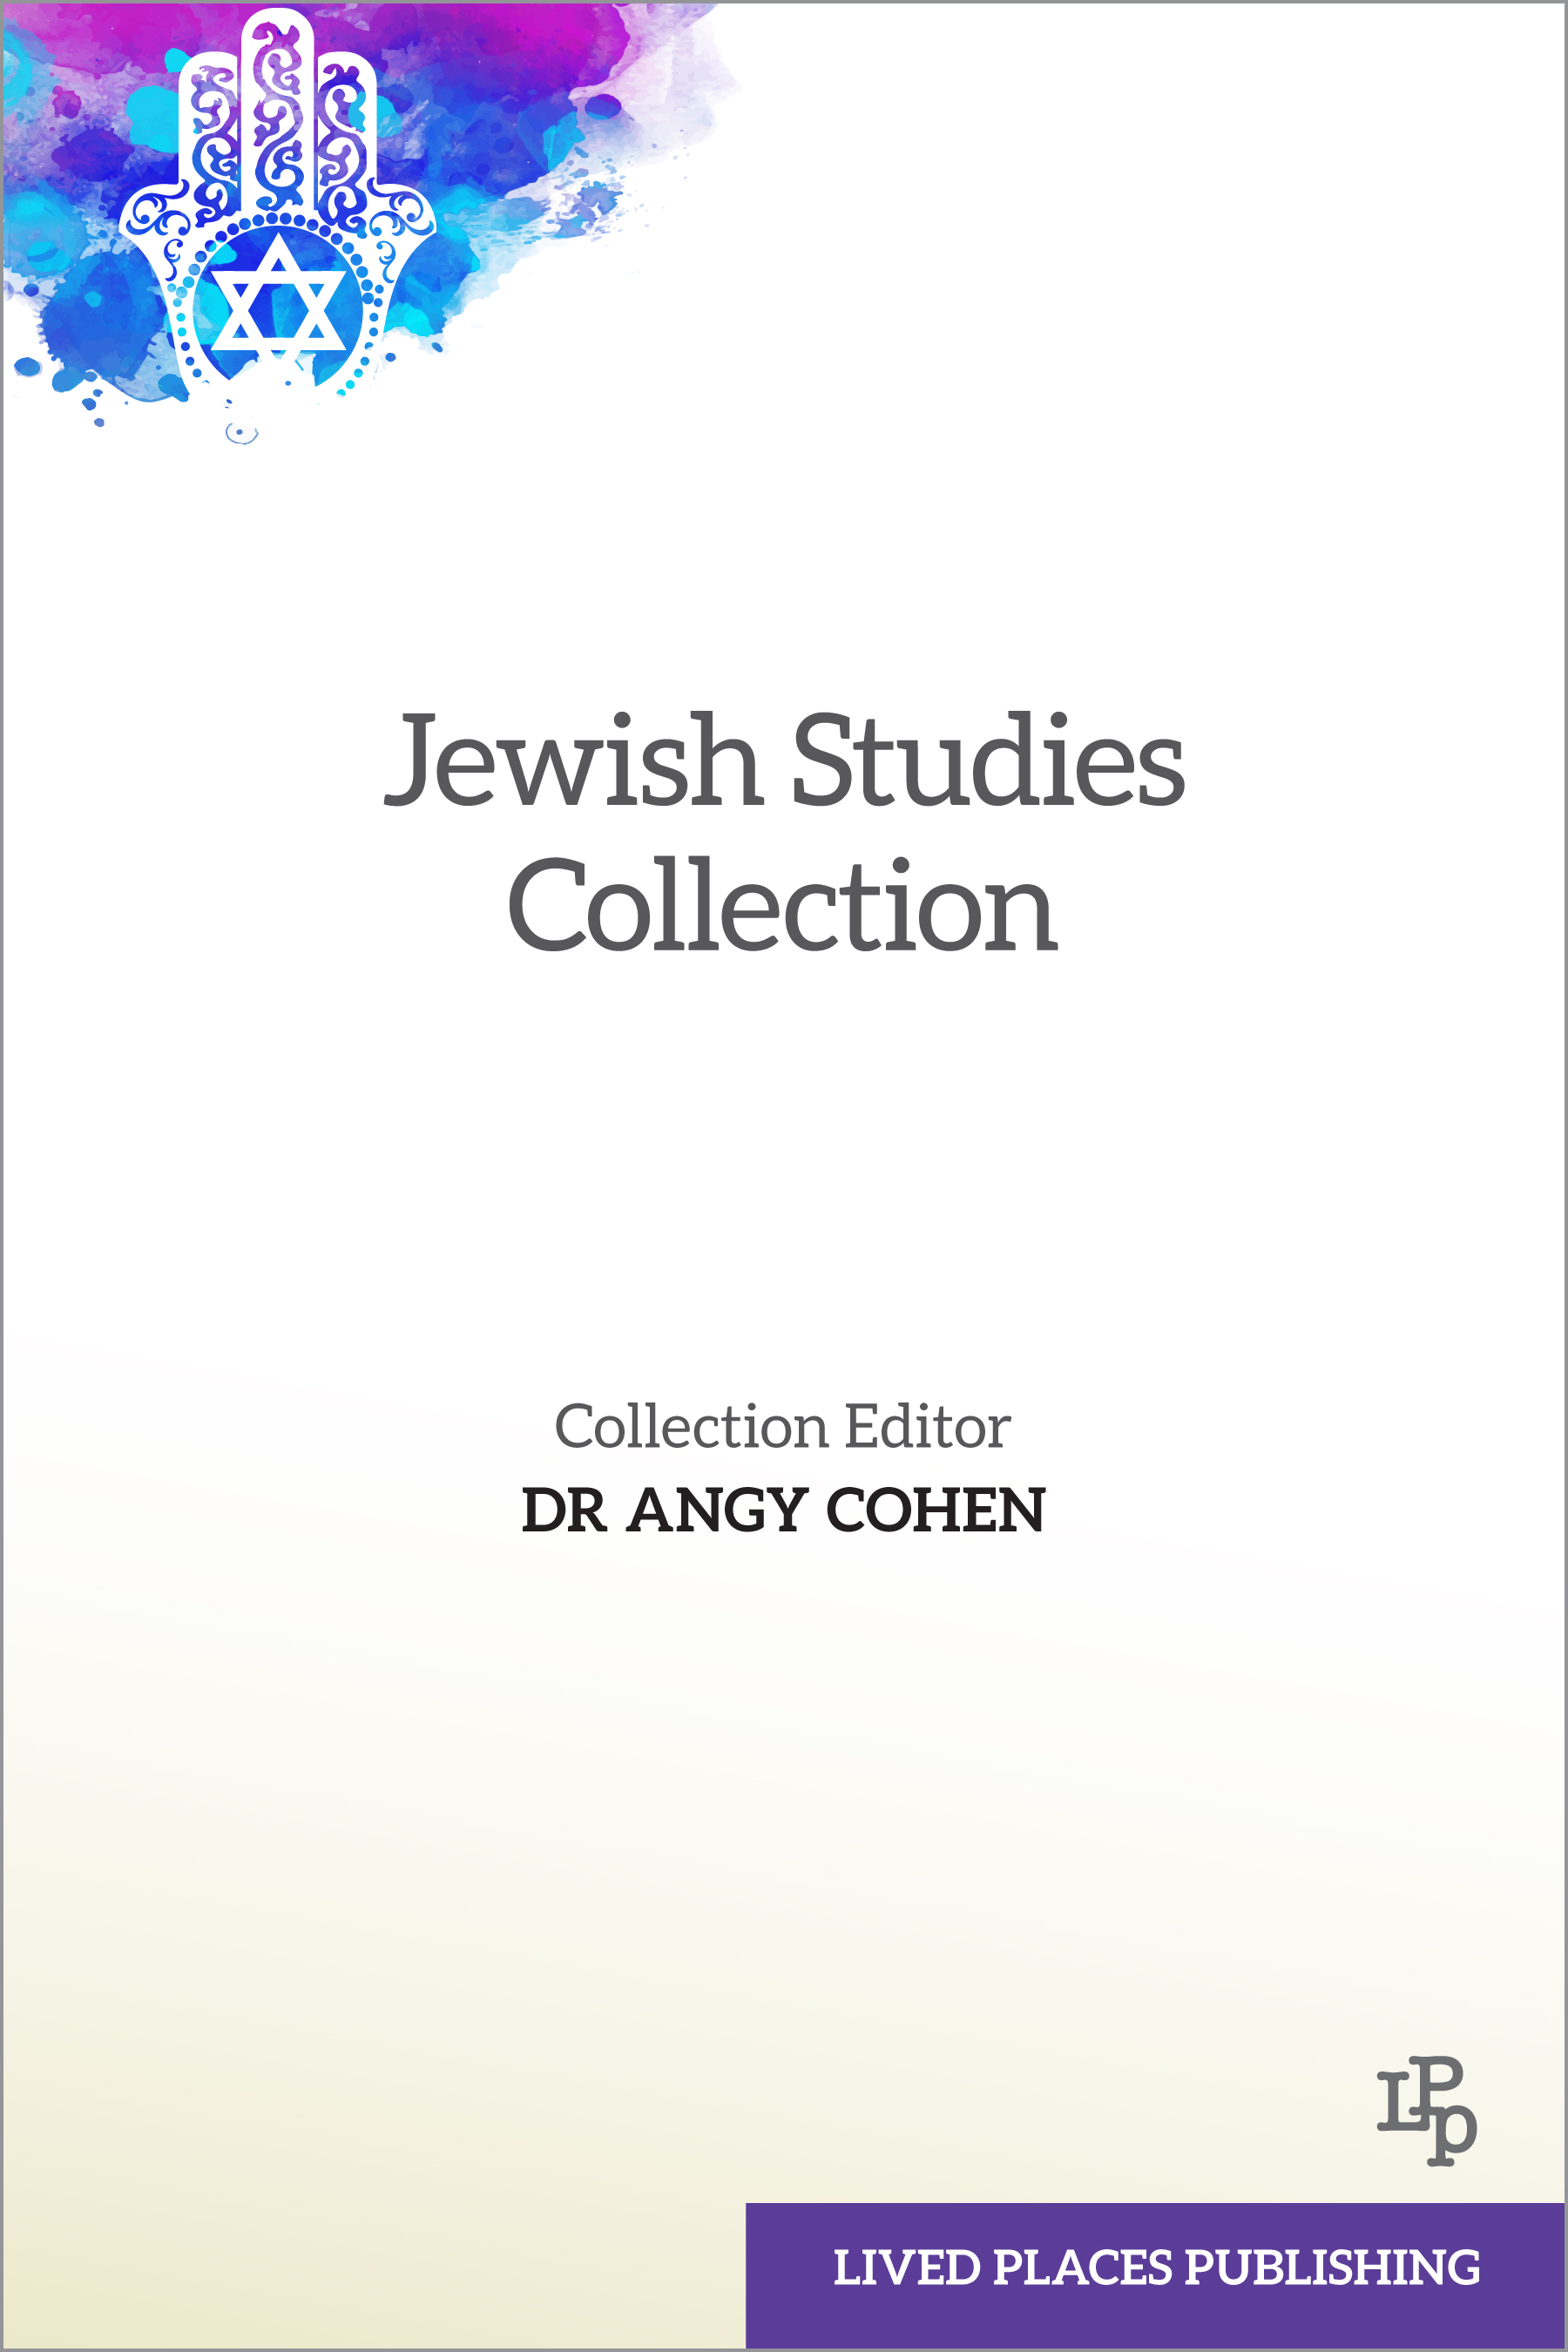 Jewish Studies collection book cover.